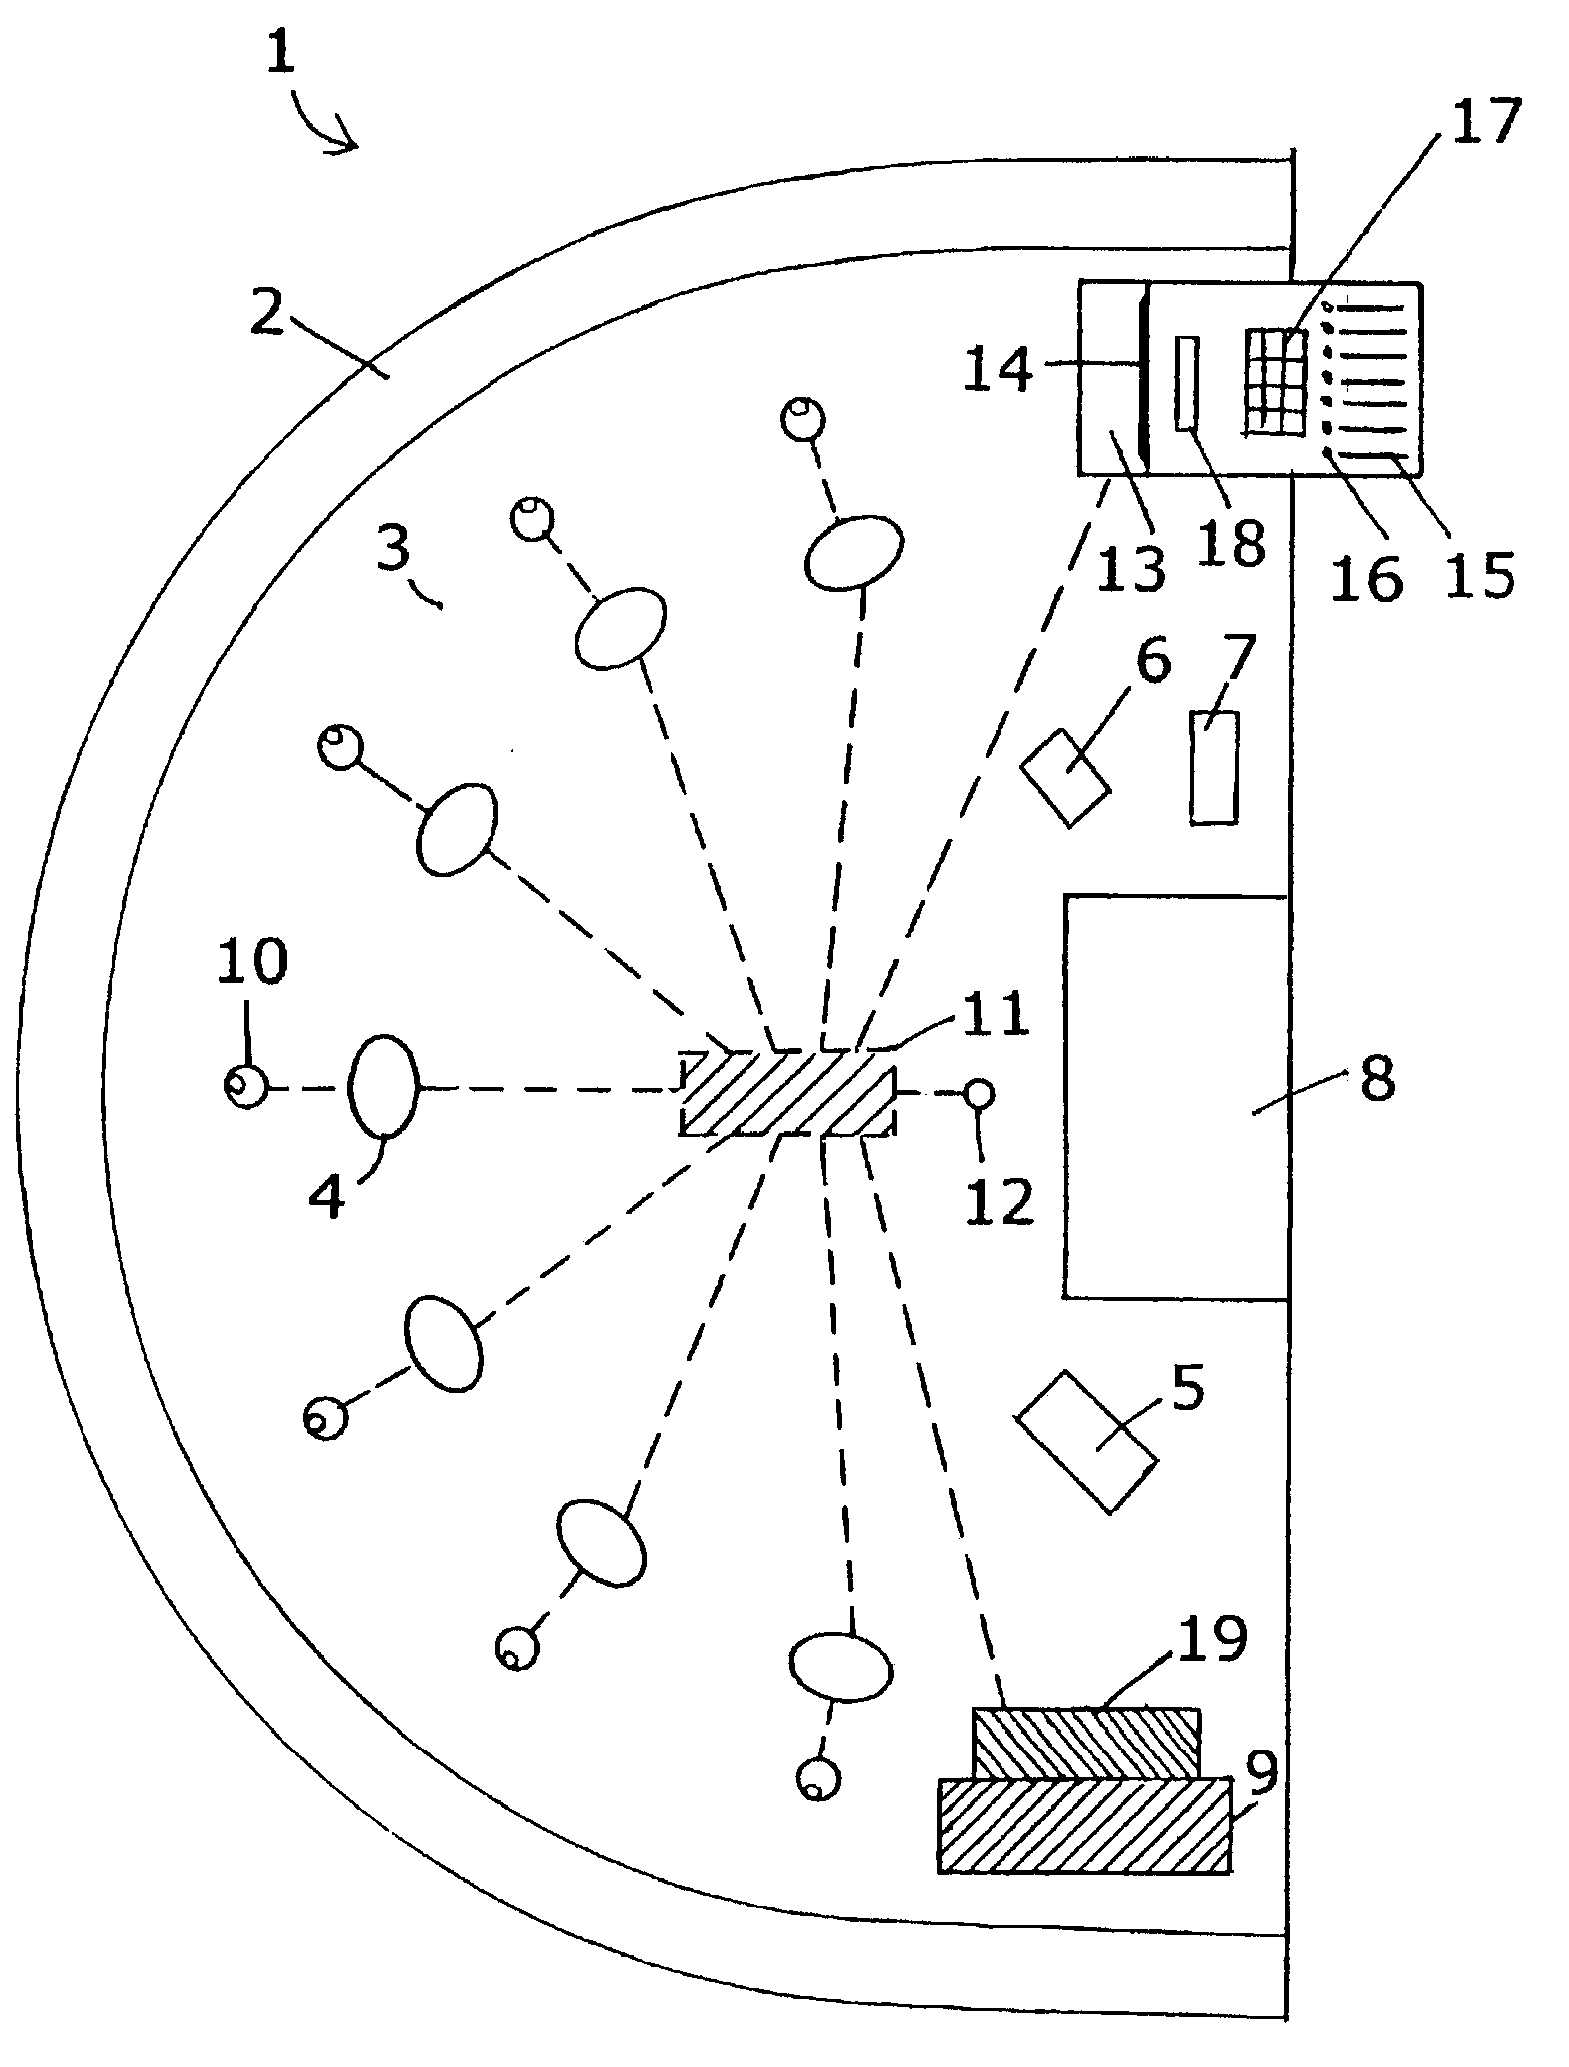 System for machine reading and processing information from gaming chips